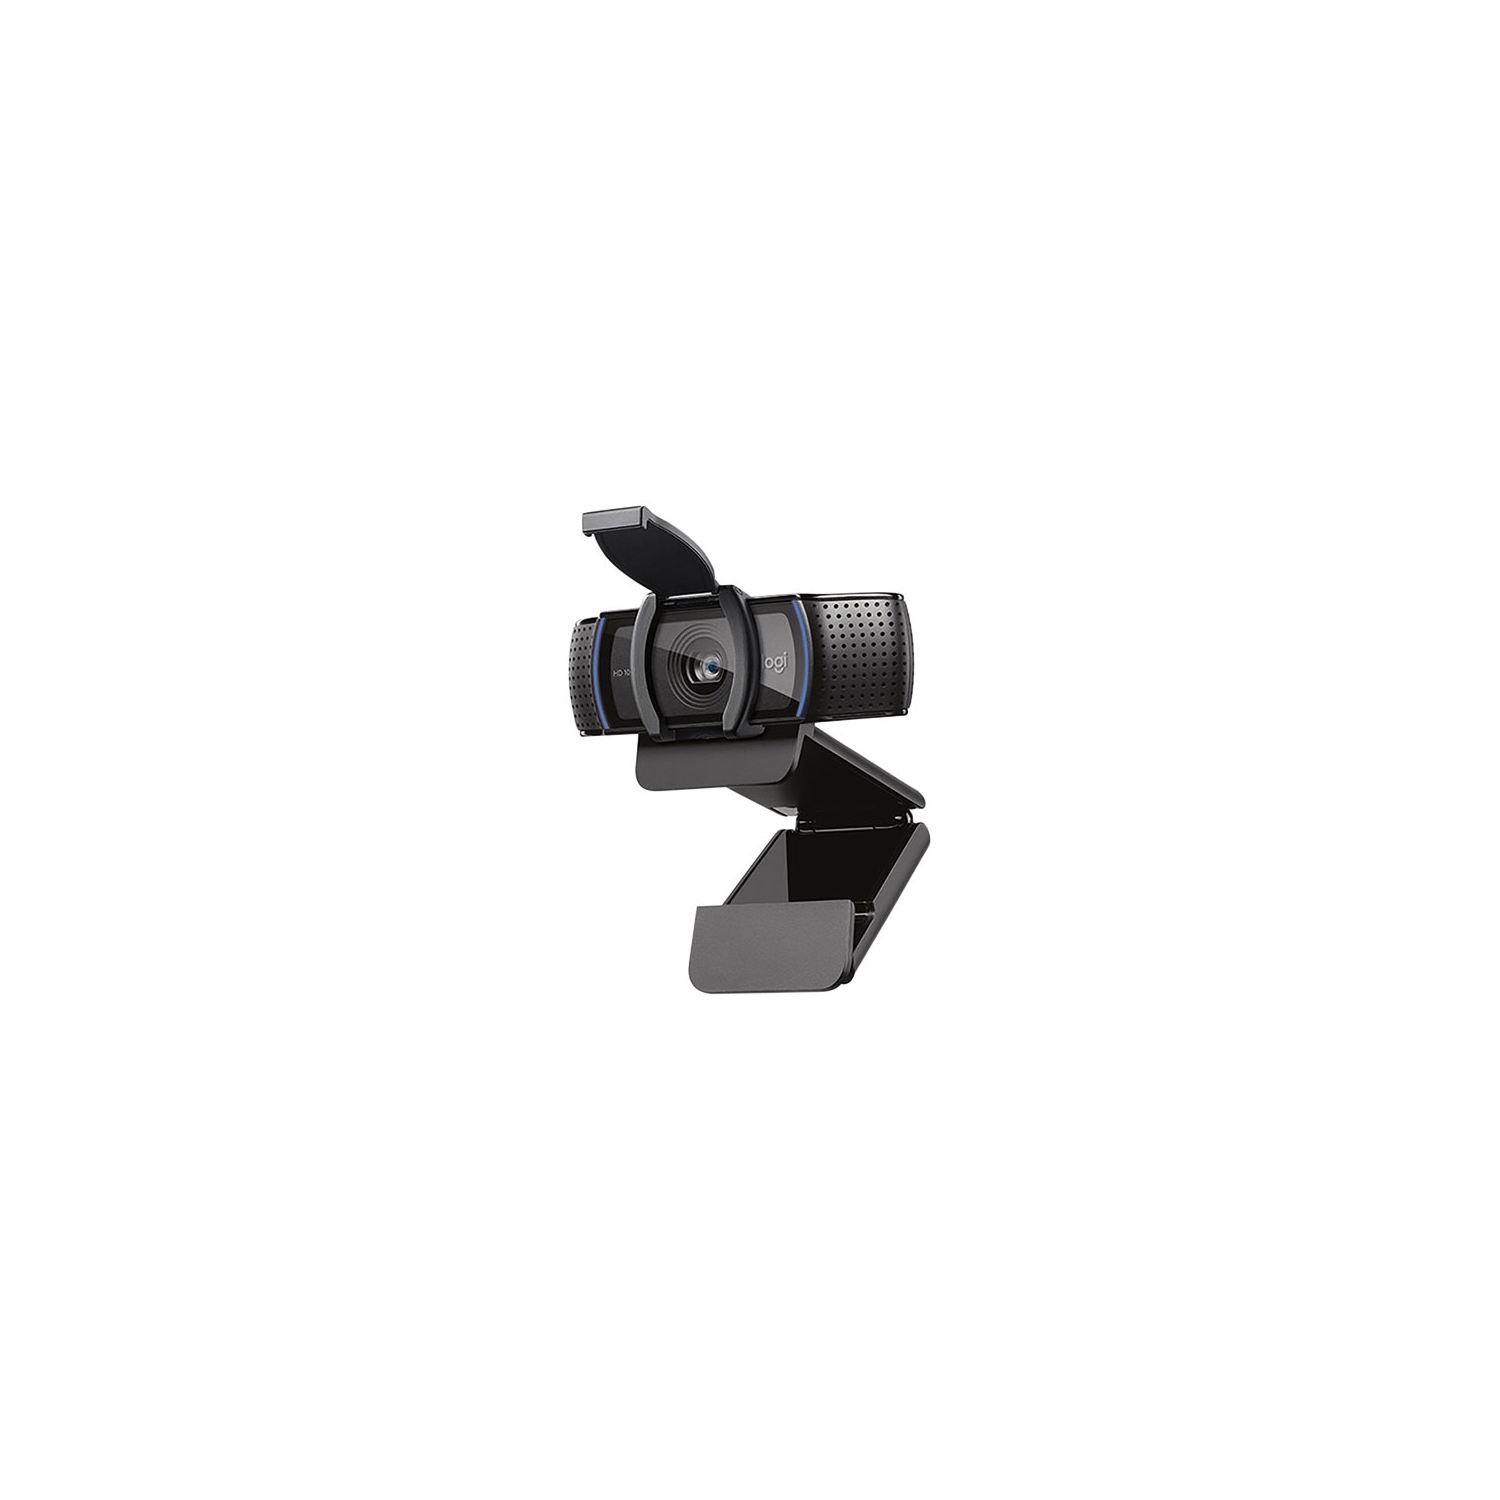 Logitech C920S Pro HD Pro Webcam with Privacy Shutter - Widescreen Video Calling and Recording, 1080p Streaming Camera